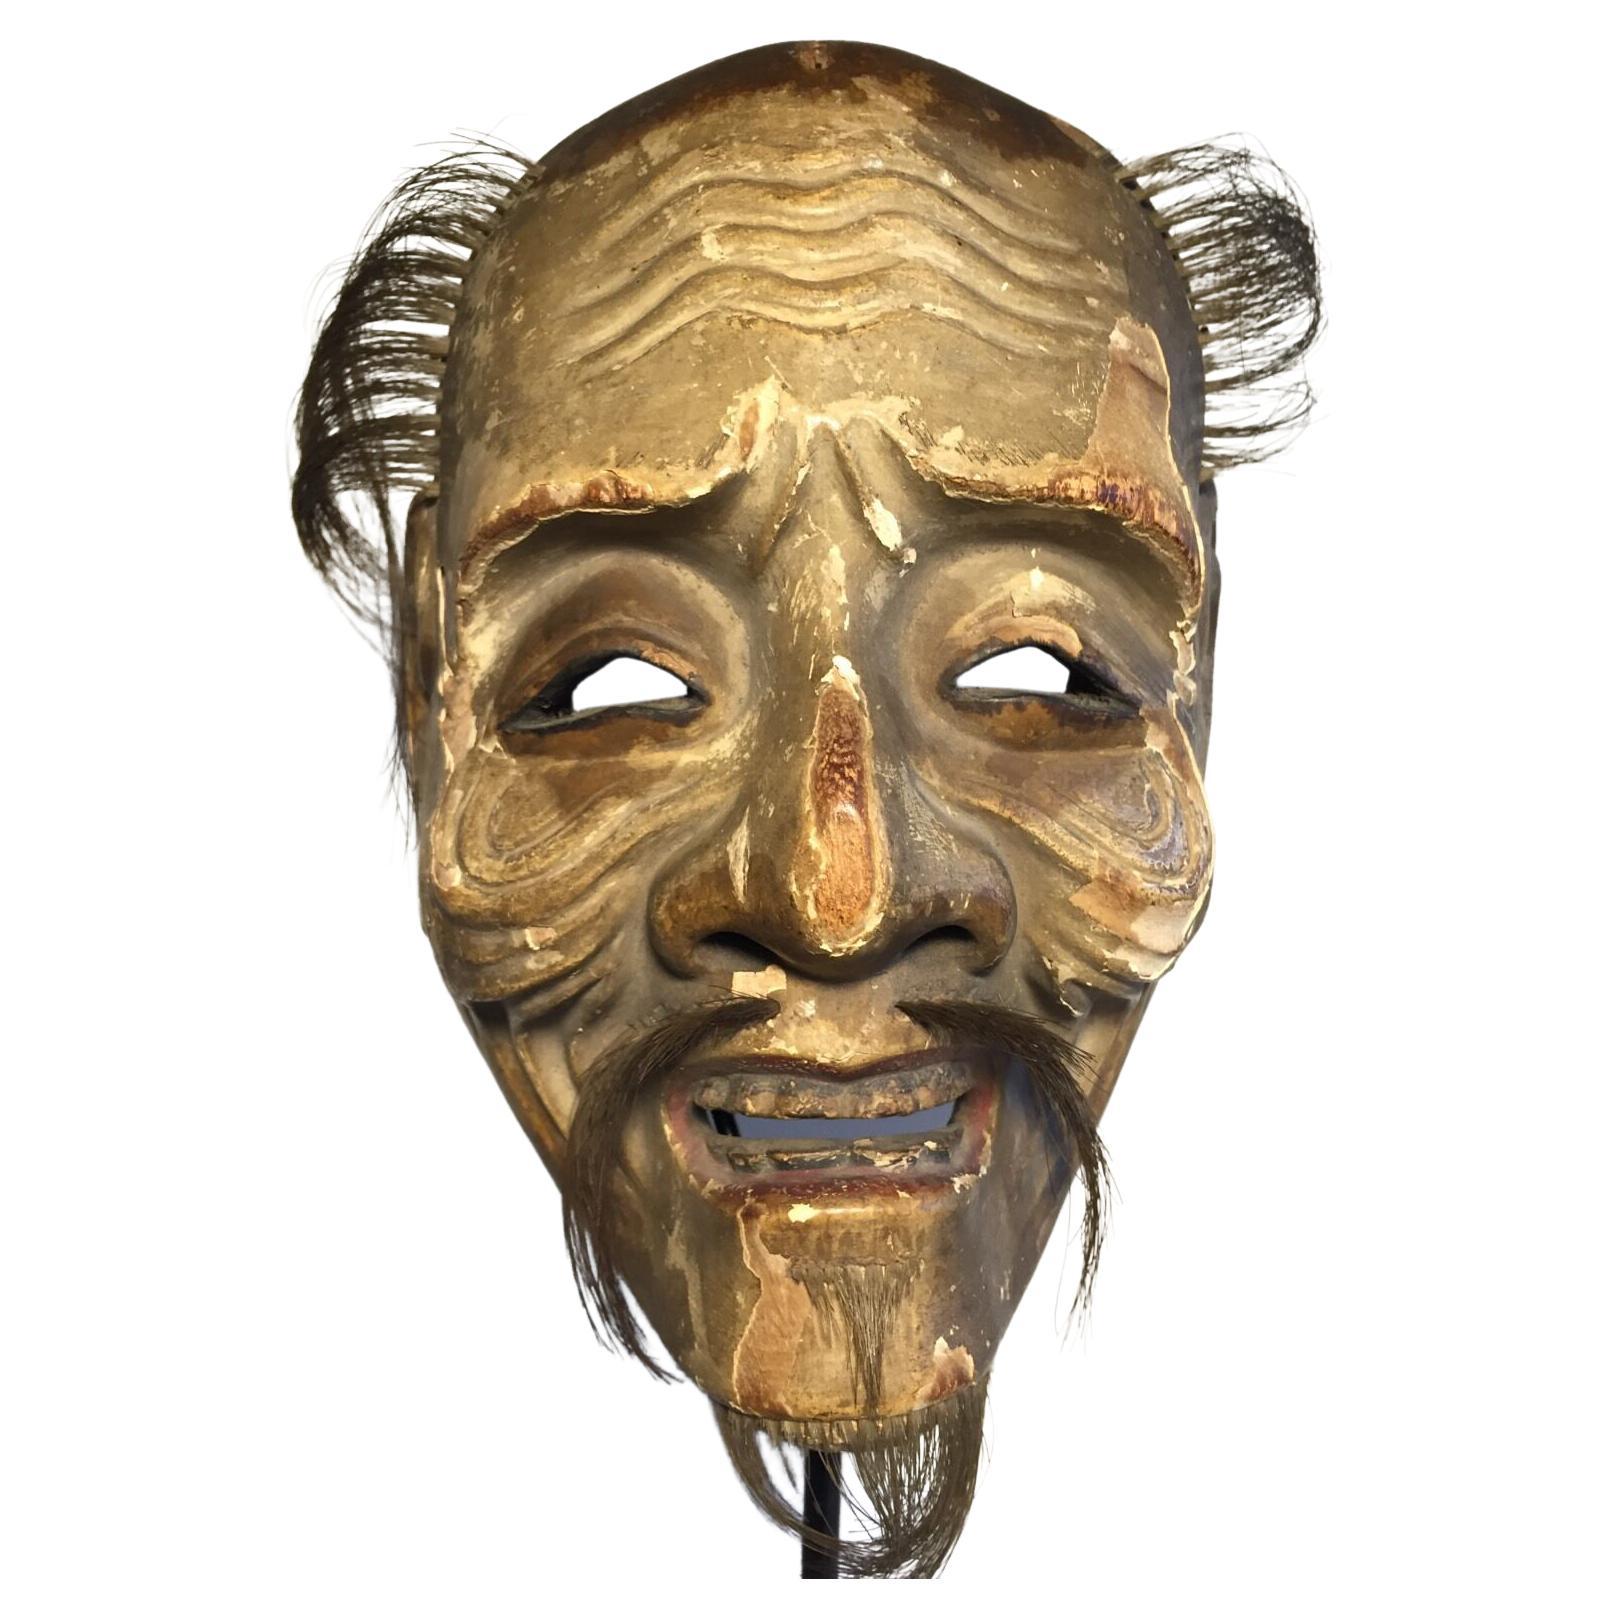 Antique Ca1600s/17th Century Japanese Noh Mask, Patina/Danced, Old Man "Ko Jo" For Sale